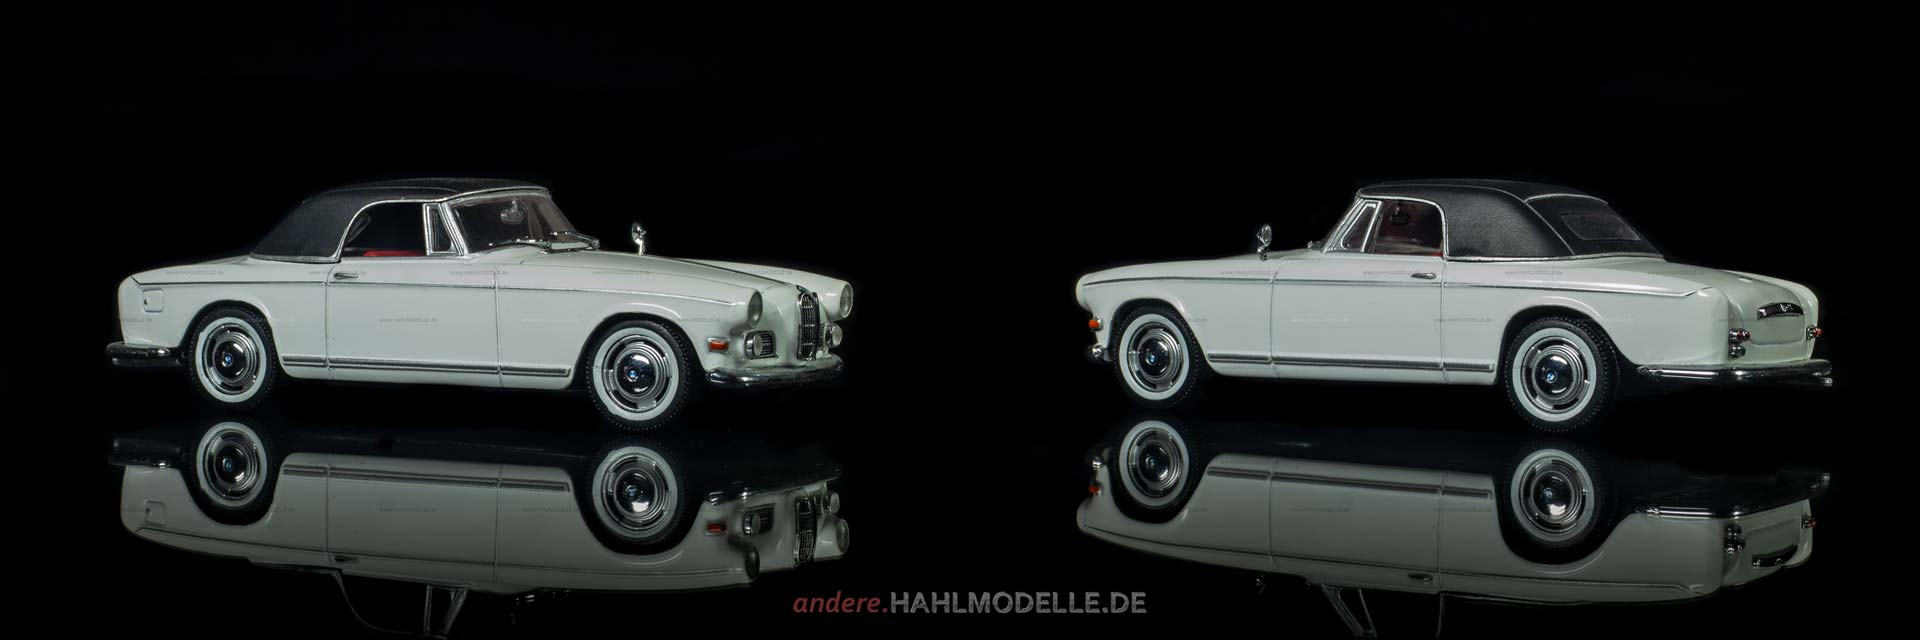 BMW 503 | Cabriolet | Revell | www.andere.hahlmodelle.de